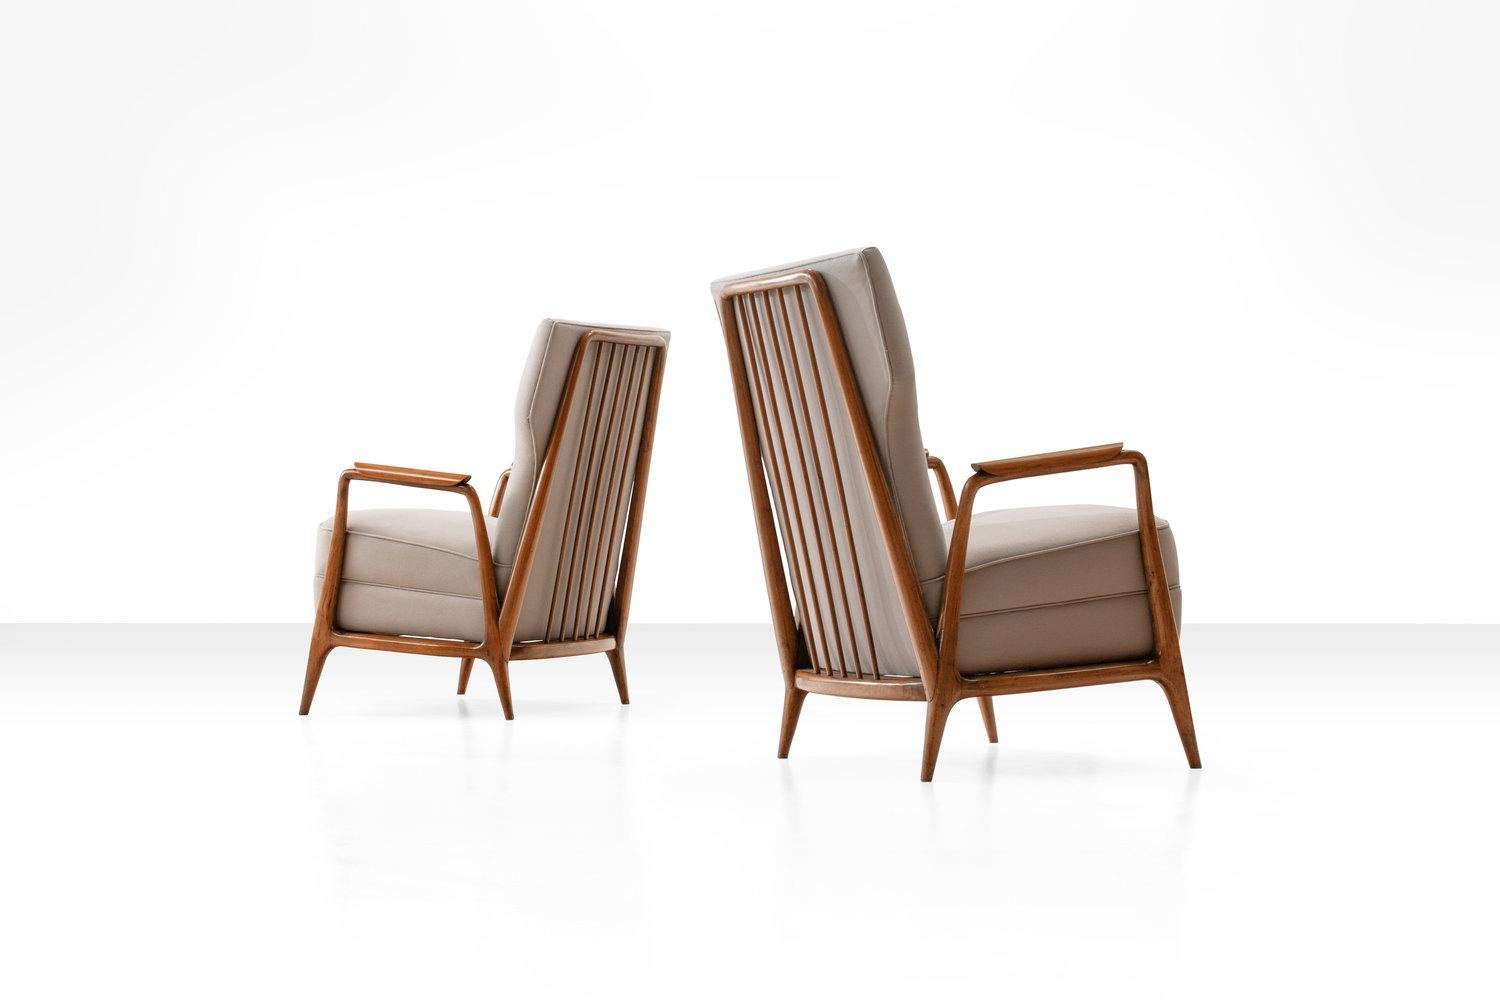 Brazilian Pair of Giuseppe Scapinelli High Back Chairs in Caviuna Wood, Brazil, 1950s